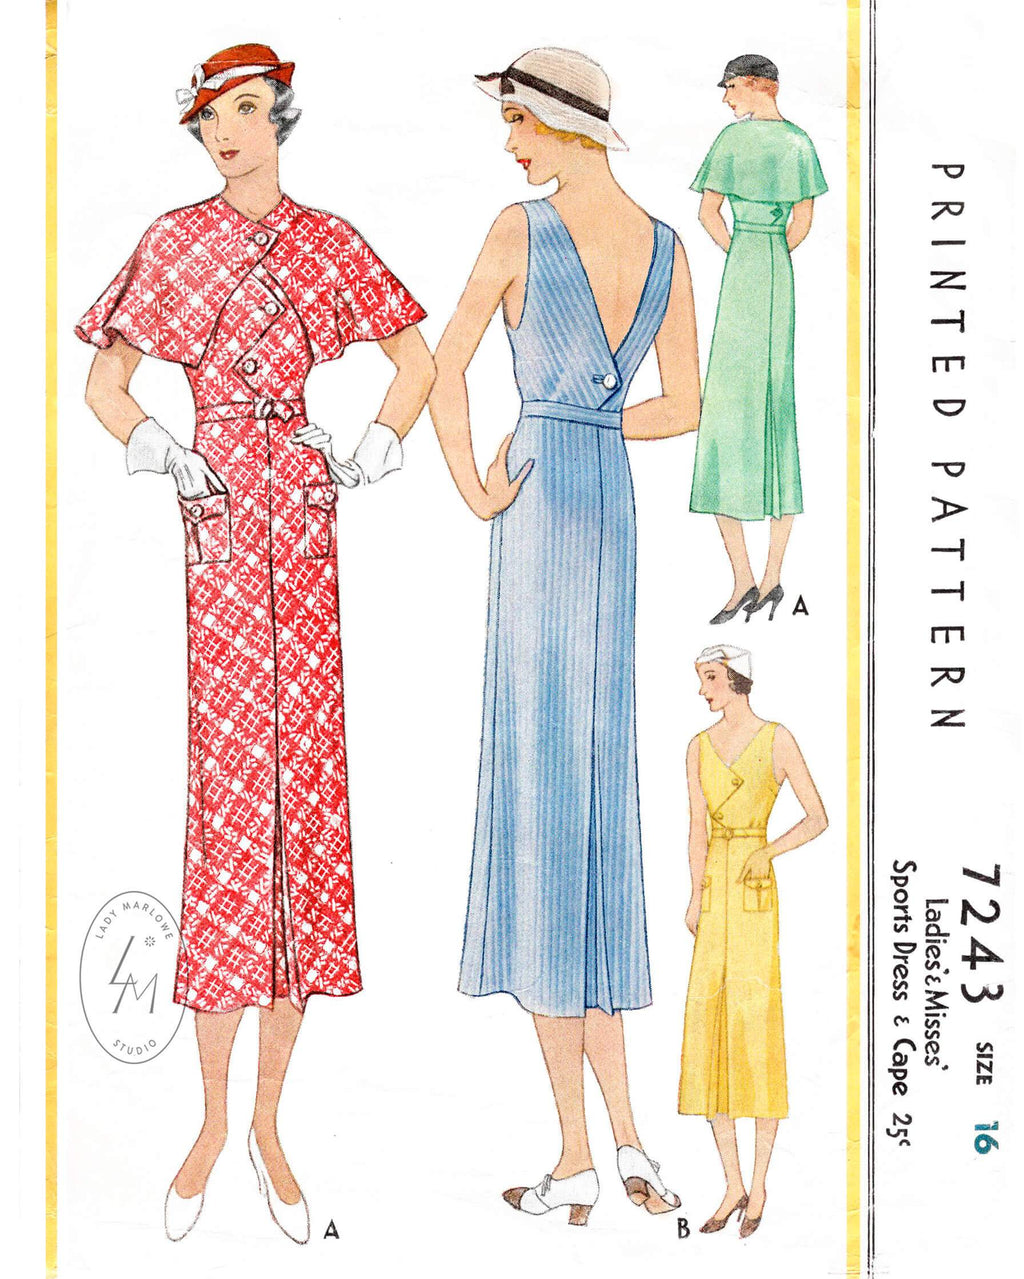 1930s 1933 McCall 7243 sports dress and cape ensemble vintage sewing pattern repro